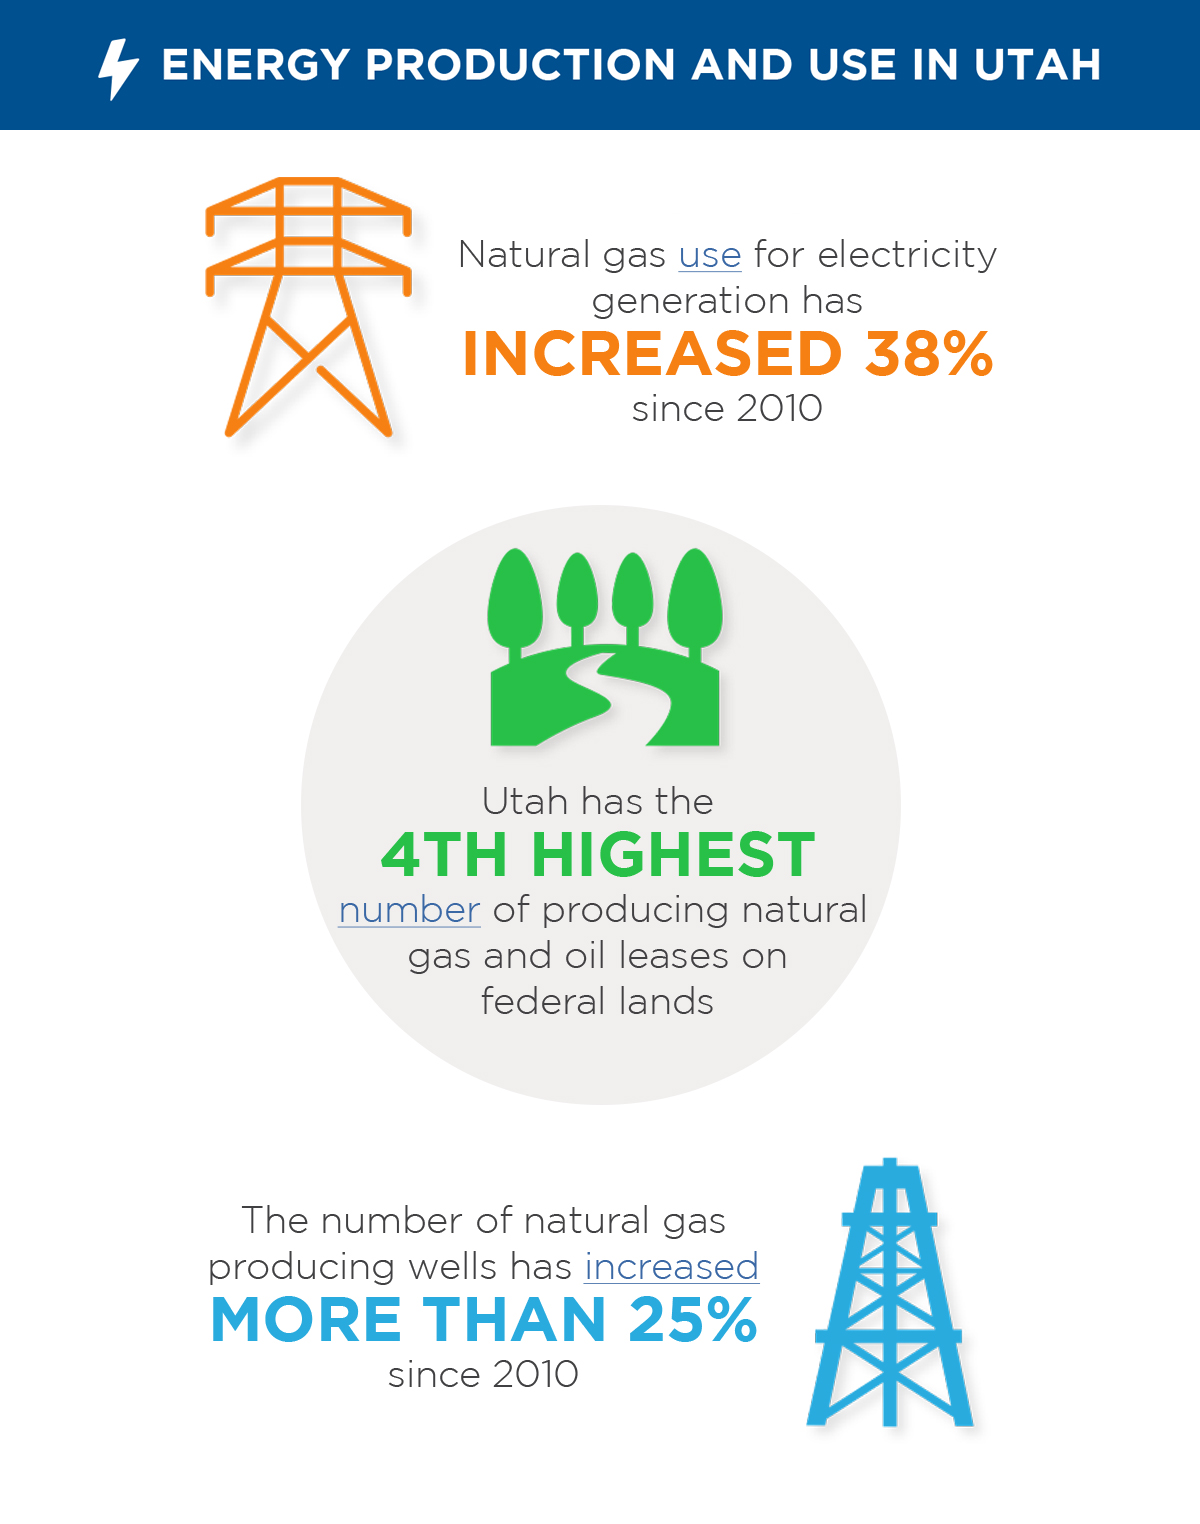 The benefits of natural gas for Utah